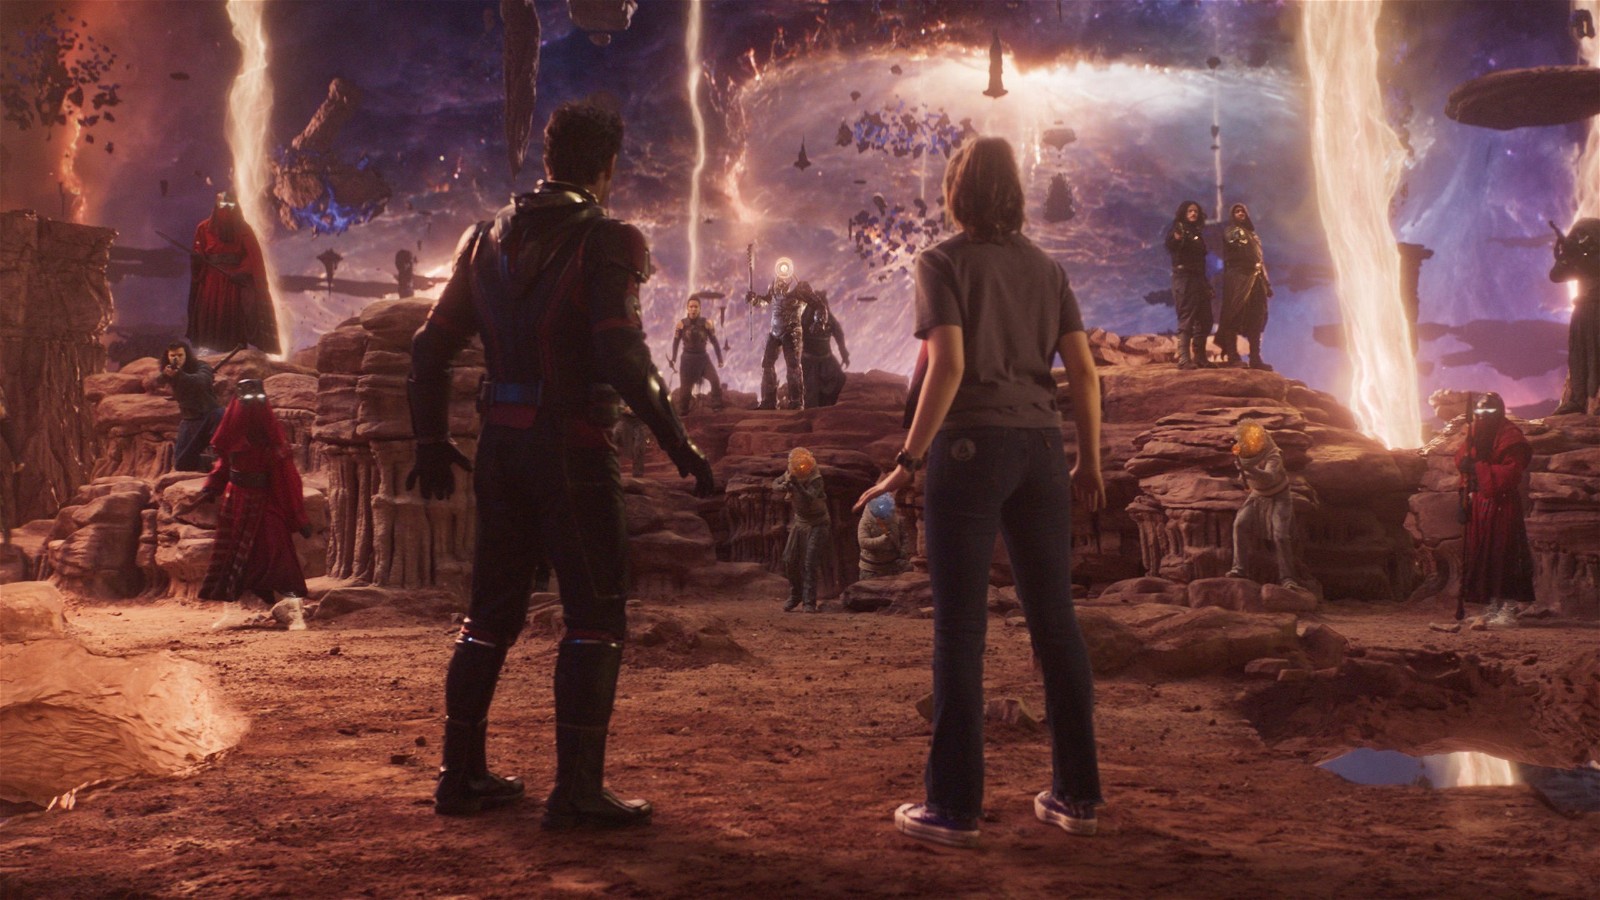 The Quantum realm in Ant-Man 3